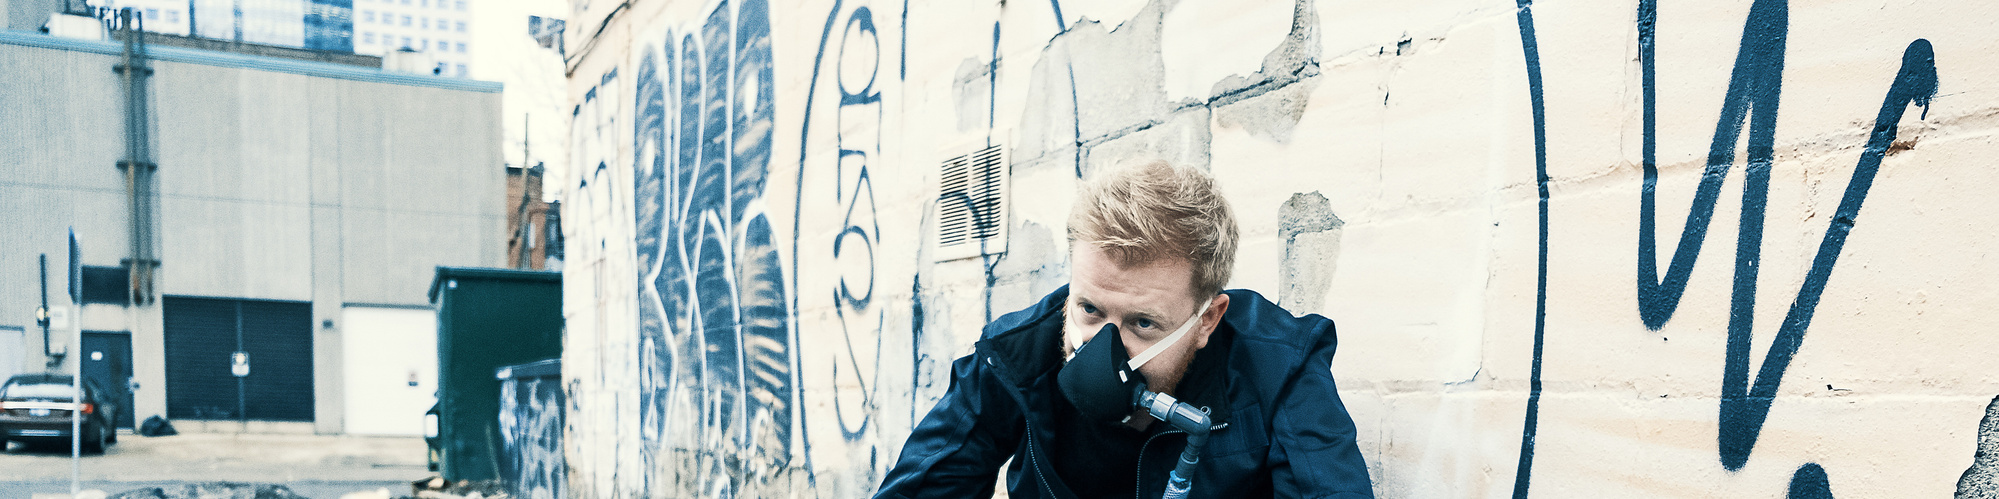 Man squatting by a graffiti covered wall. He wears a mask, which is connected by a hose to a backpack which has glowing lights seen through a window.